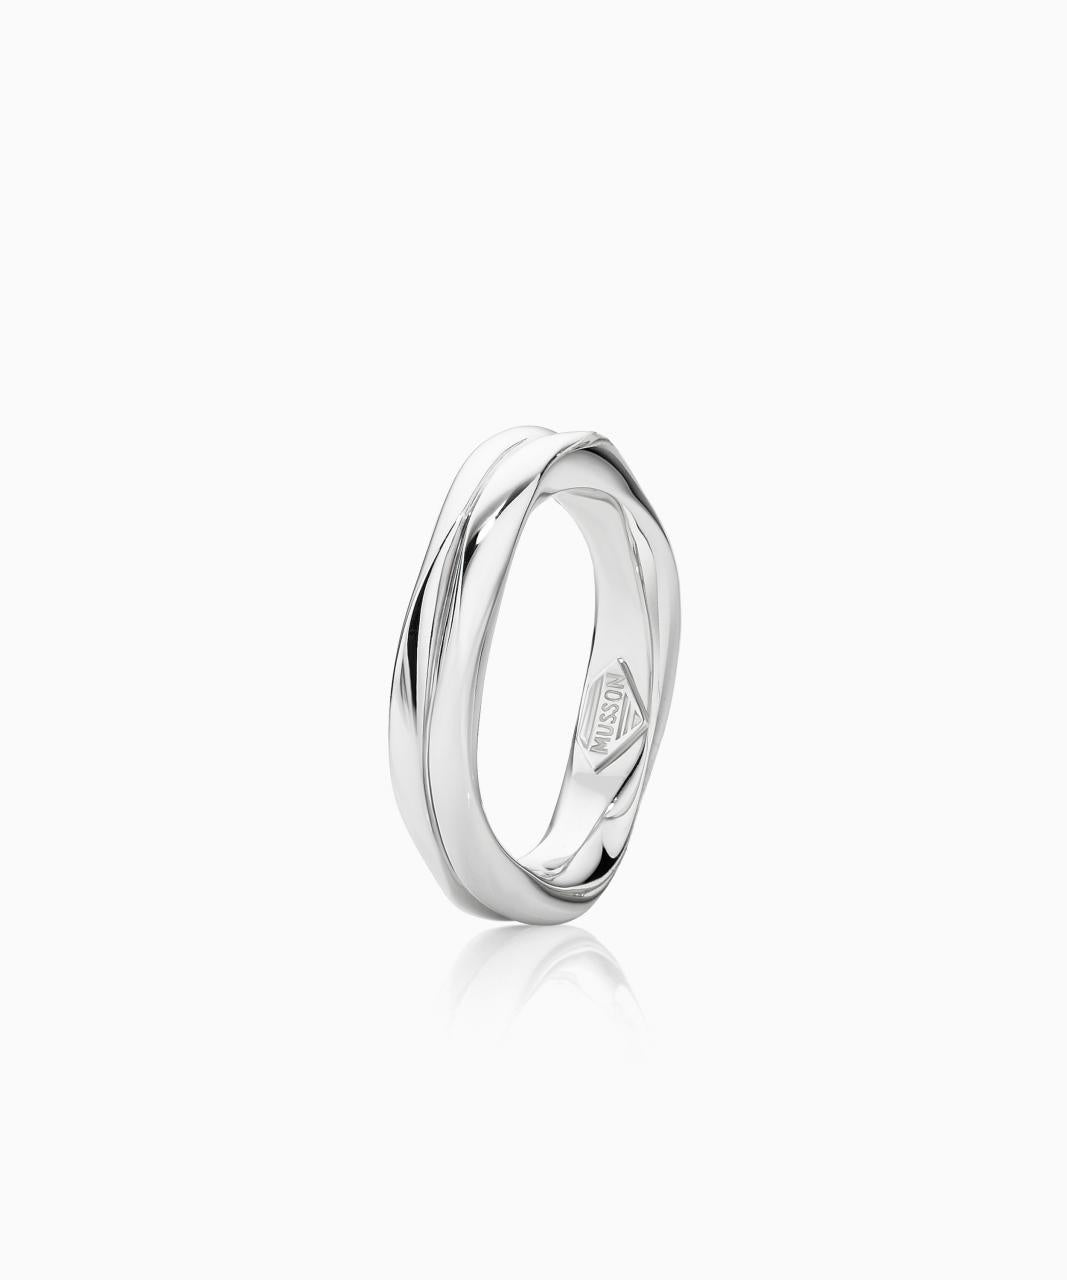 Entwined Wedding Ring - 4mm